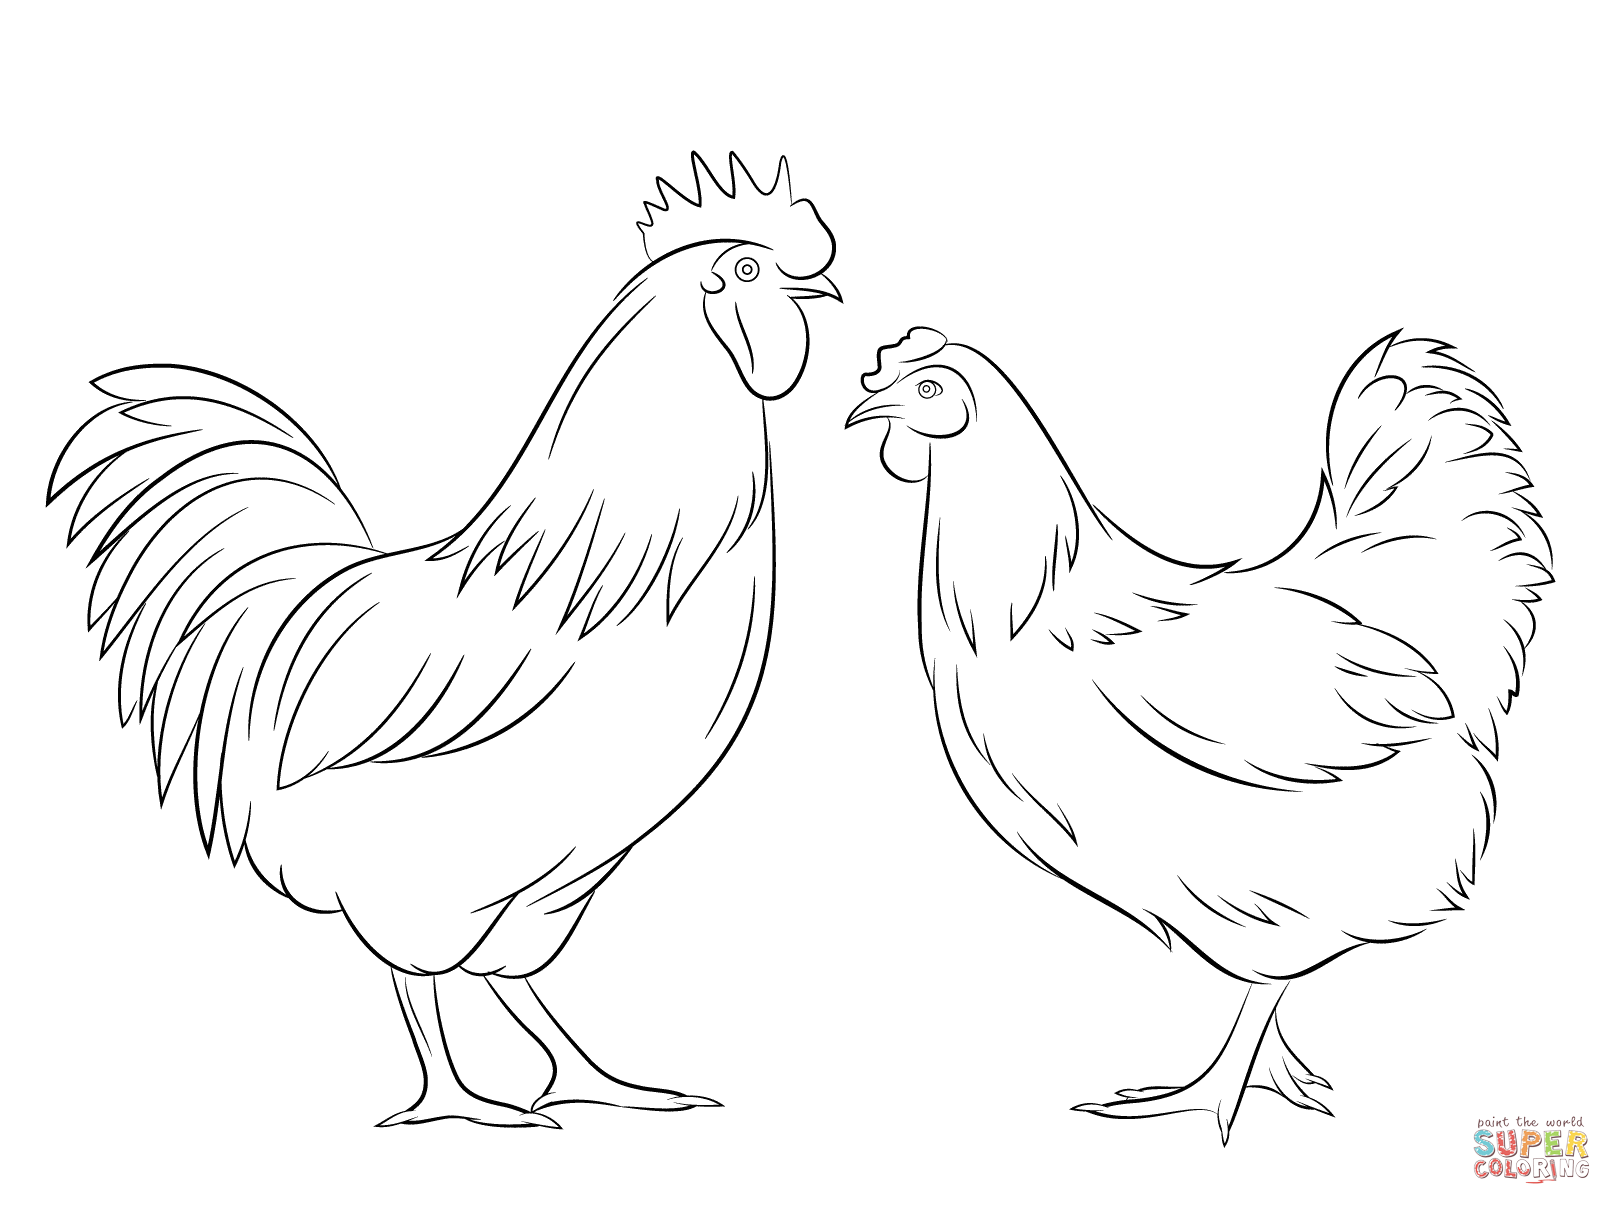 Rooster and Hen coloring page | Free Printable Coloring Pages